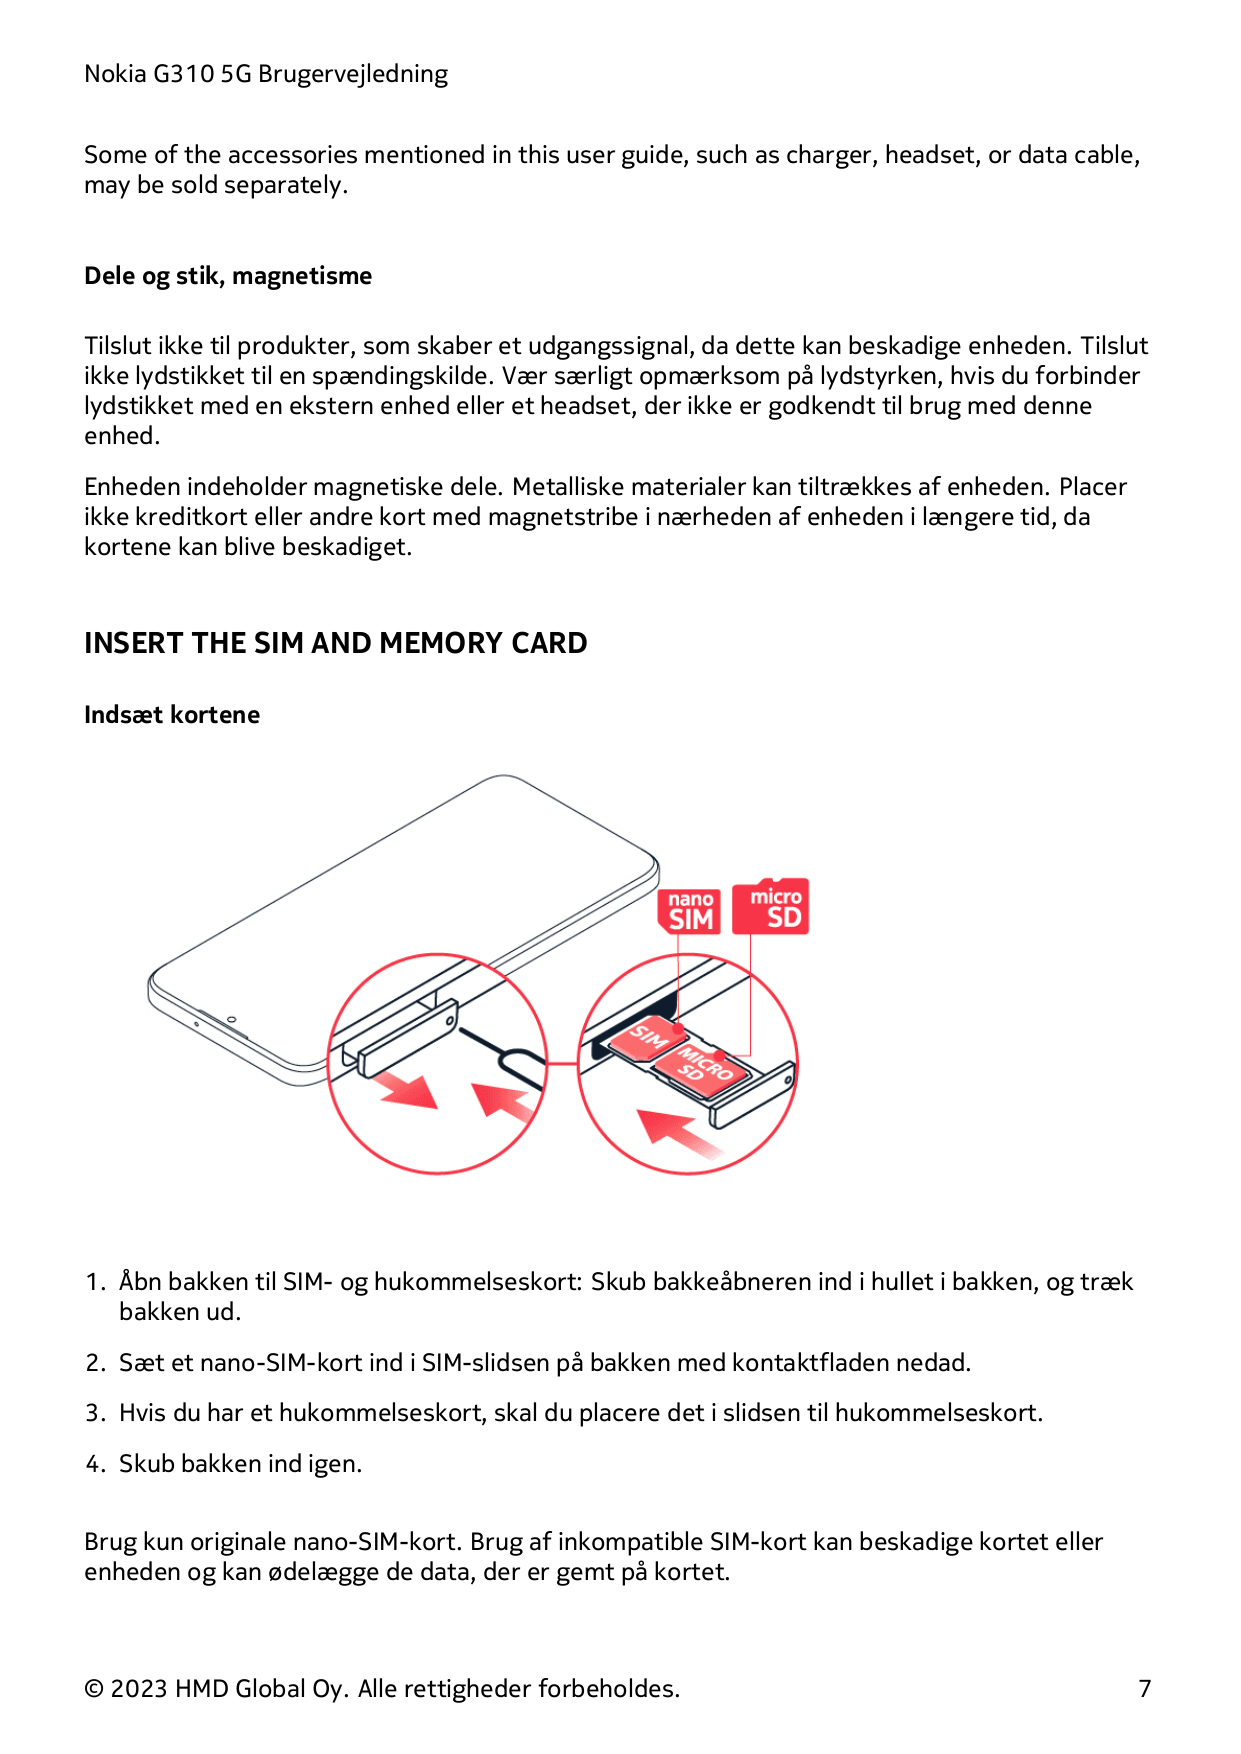 Nokia G310 5G BrugervejledningSome of the accessories mentioned in this user guide, such as charger, headset, or data cable,may 